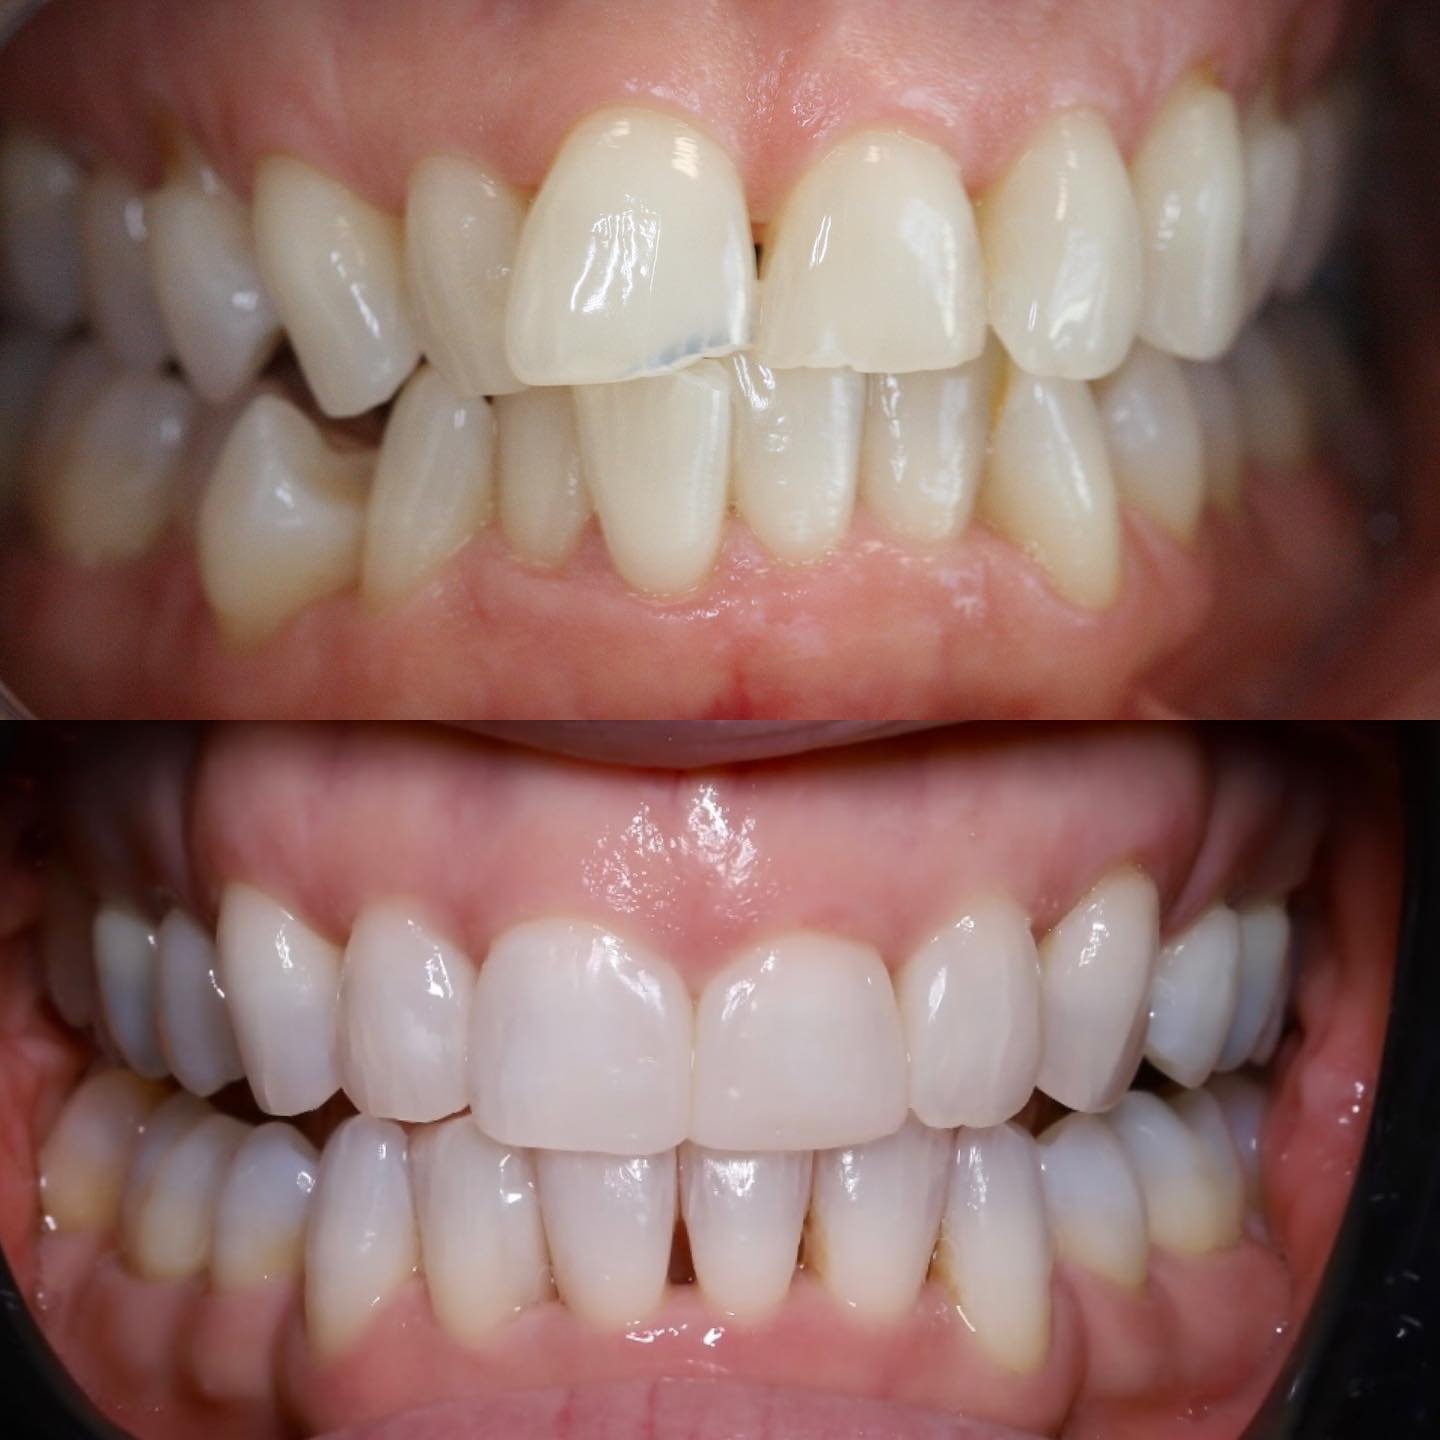 Minimally Invasive Aesthetic Dentistry⛄️

A beautiful result for a lovely patient!😁

Fixed Braces with our Consultant Orthodontist Jo, then I take all the glory with whitening and composite bonding to improve the shade and shape! 🎨 

Our patient wa